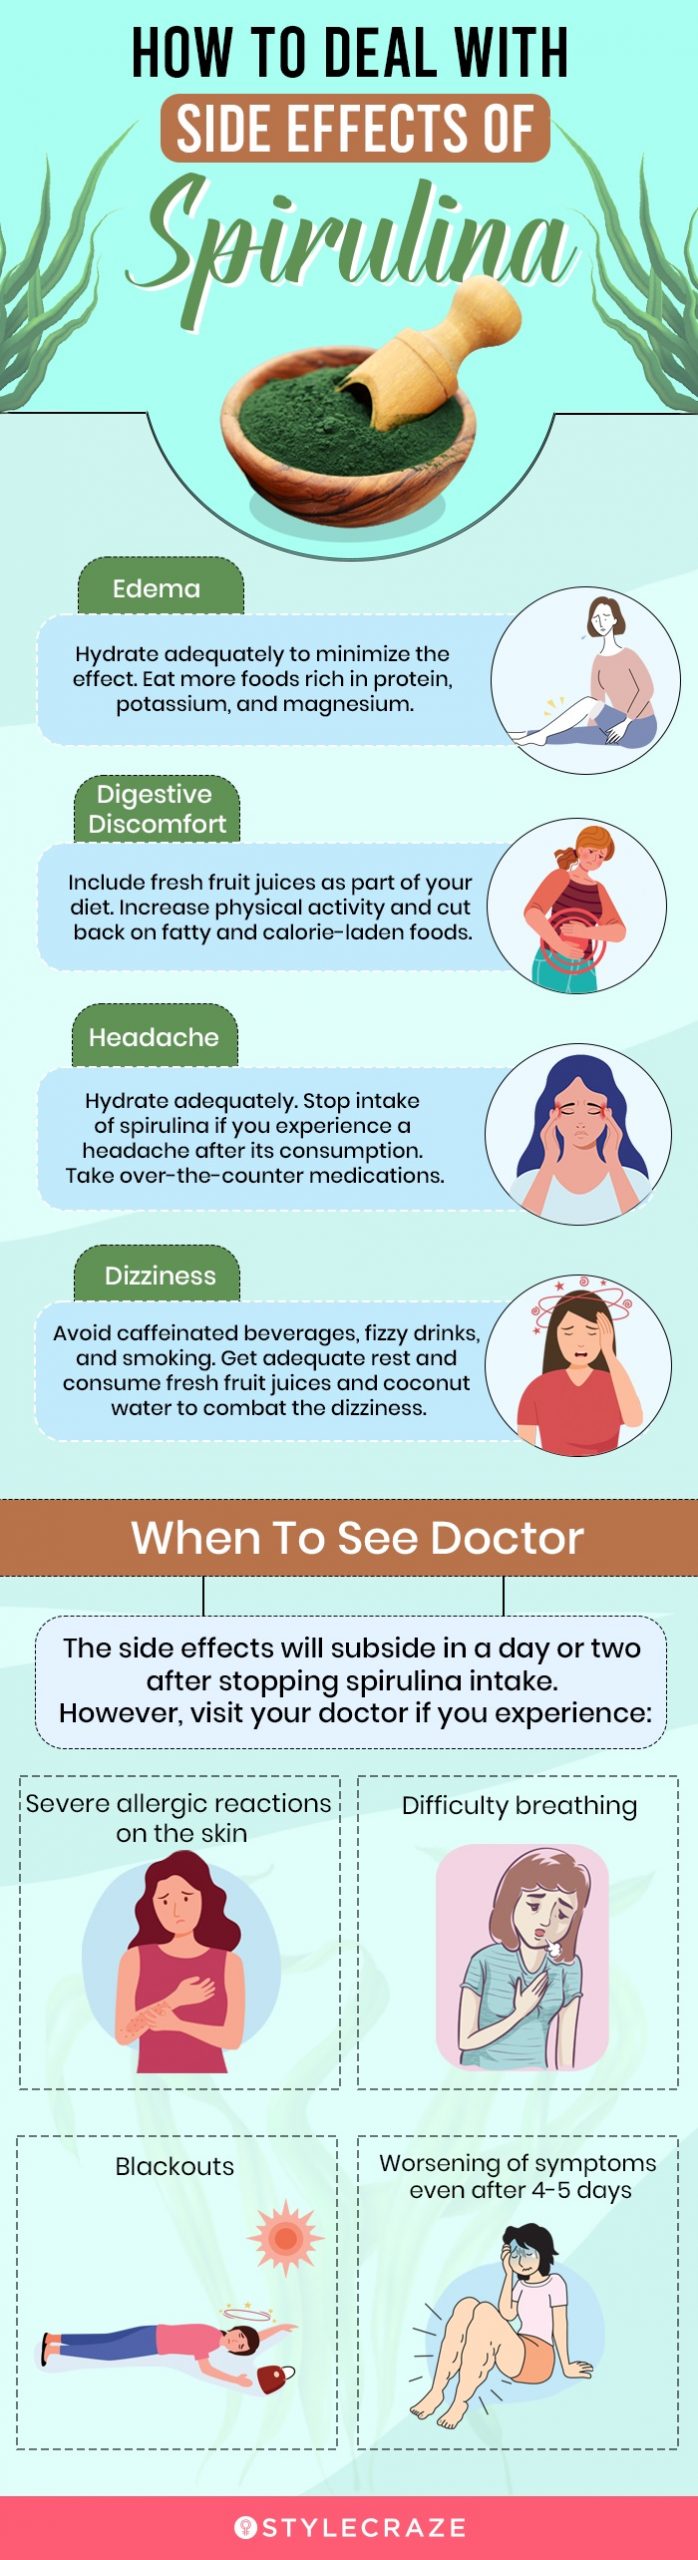 how to deal with side effects of spirulina (infographic)